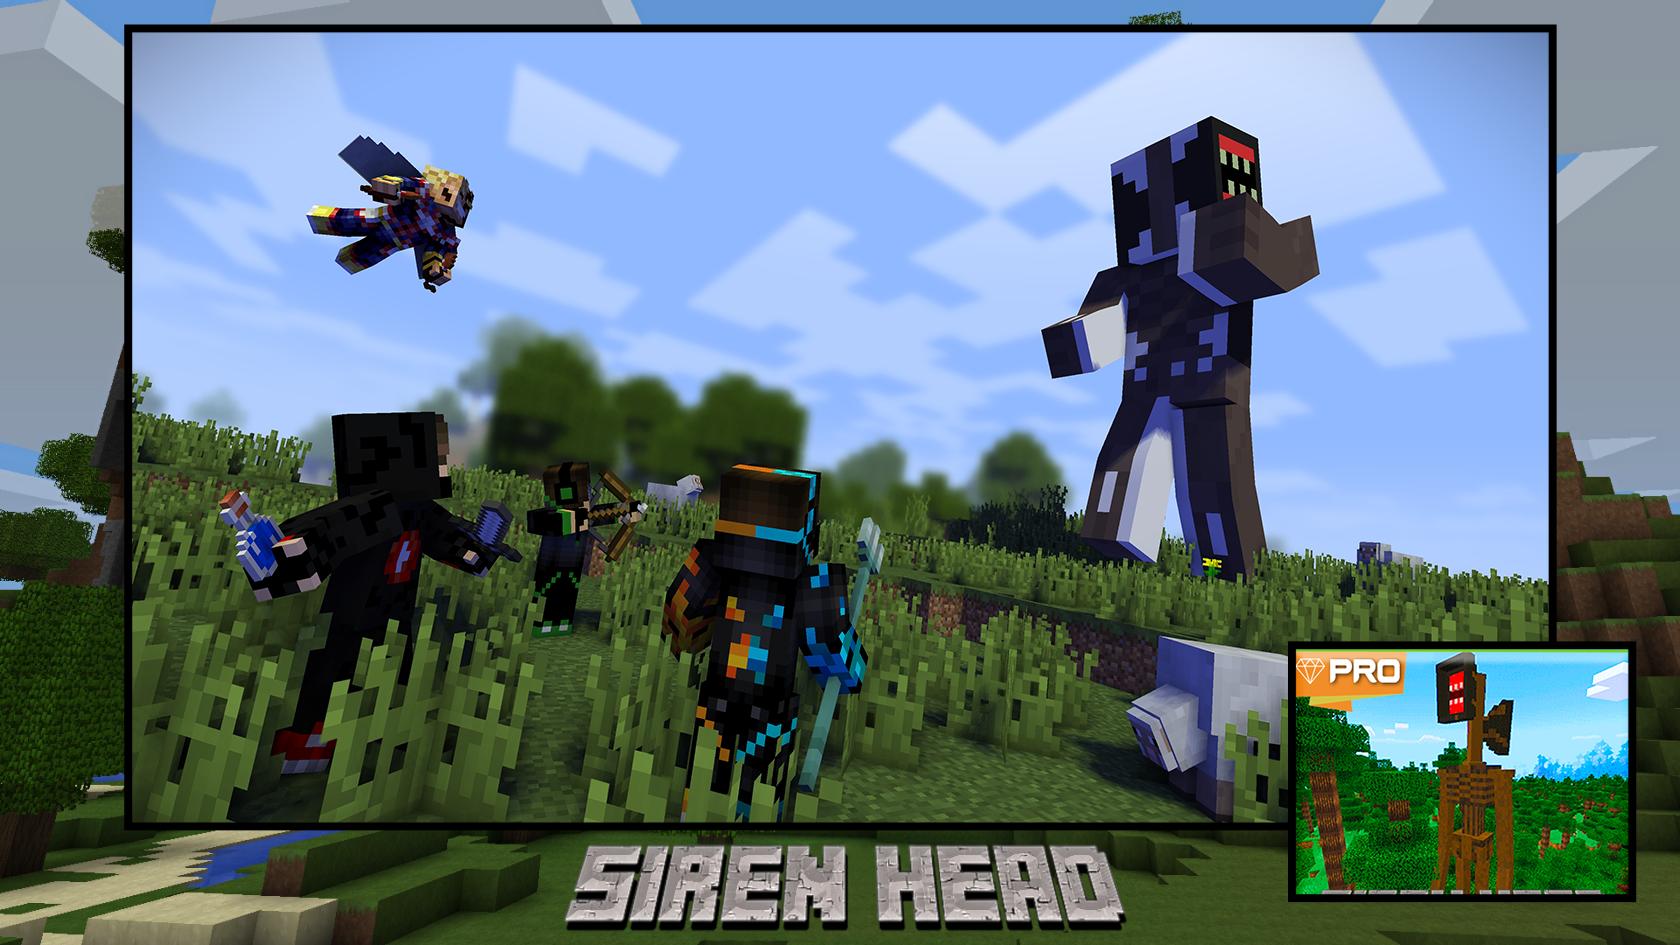 Siren Head Maps For Minecraft For Android Apk Download - siren head roblox game map